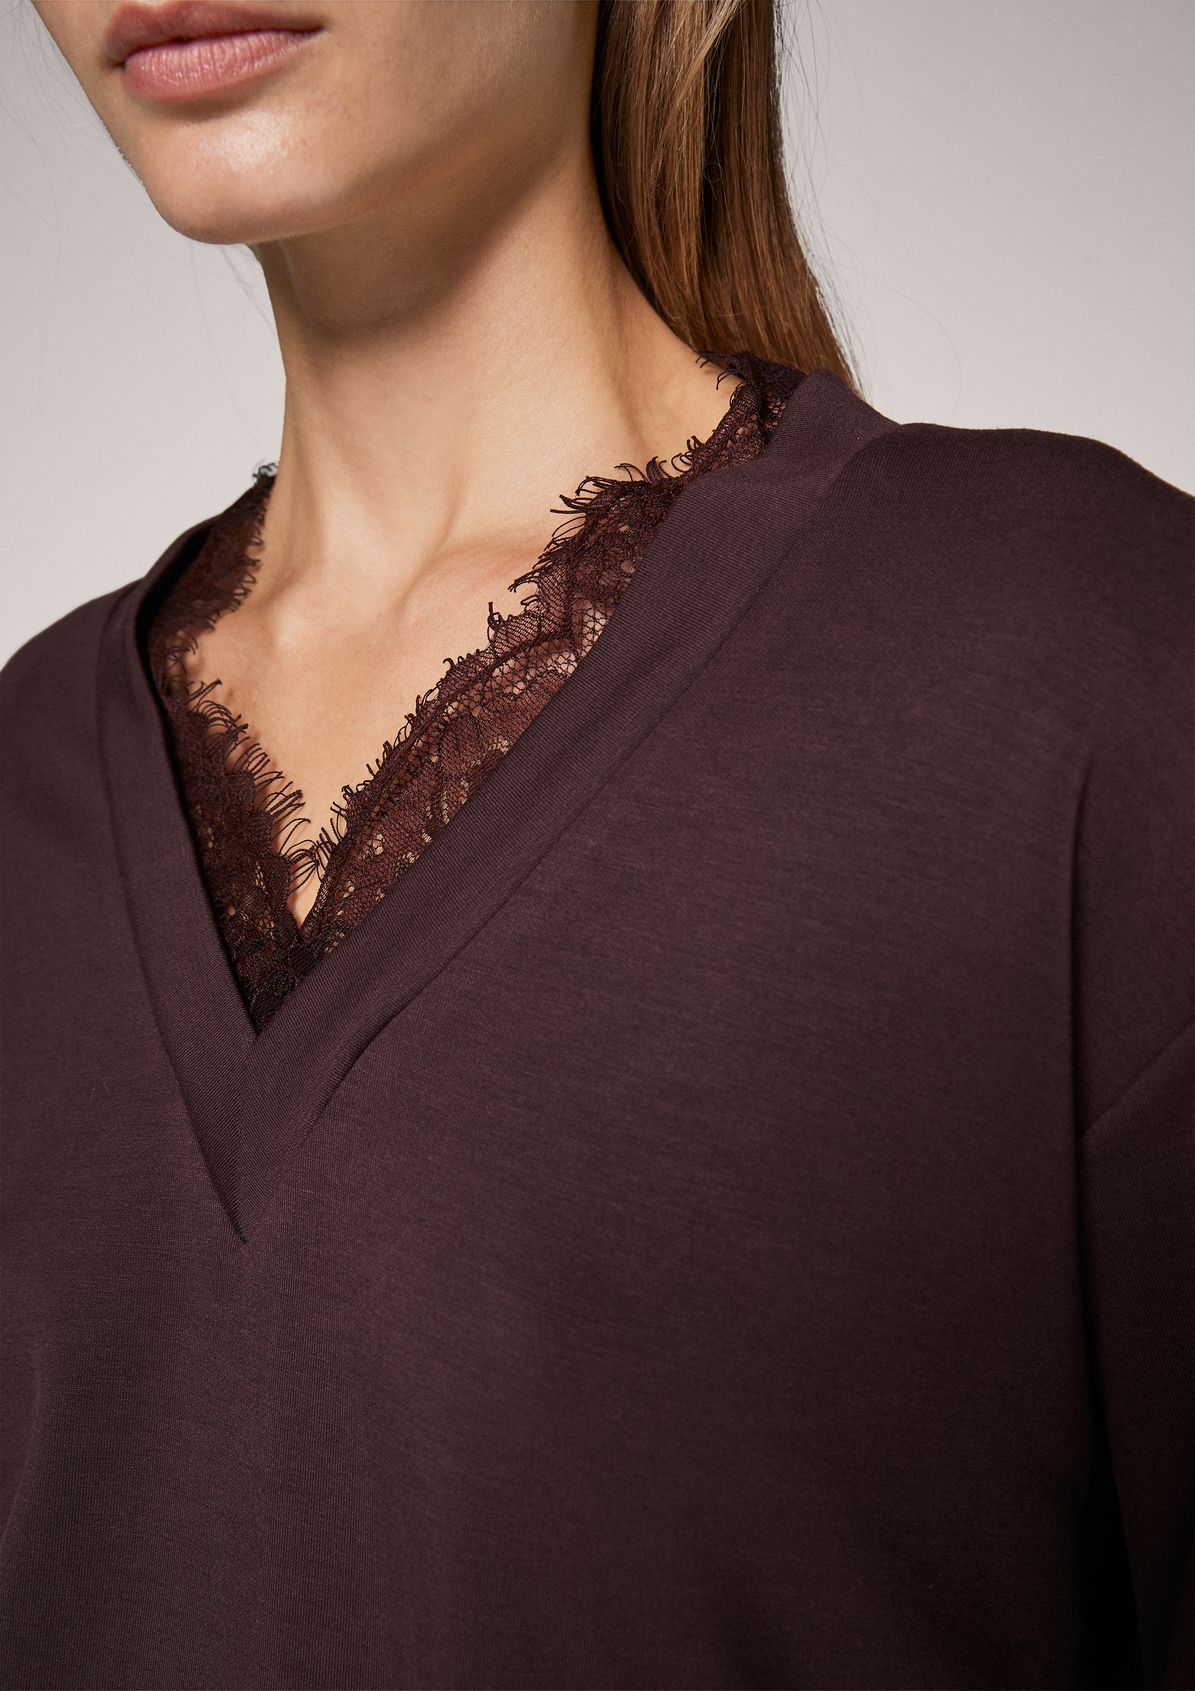 Sweatshirt with a lace insert from comma